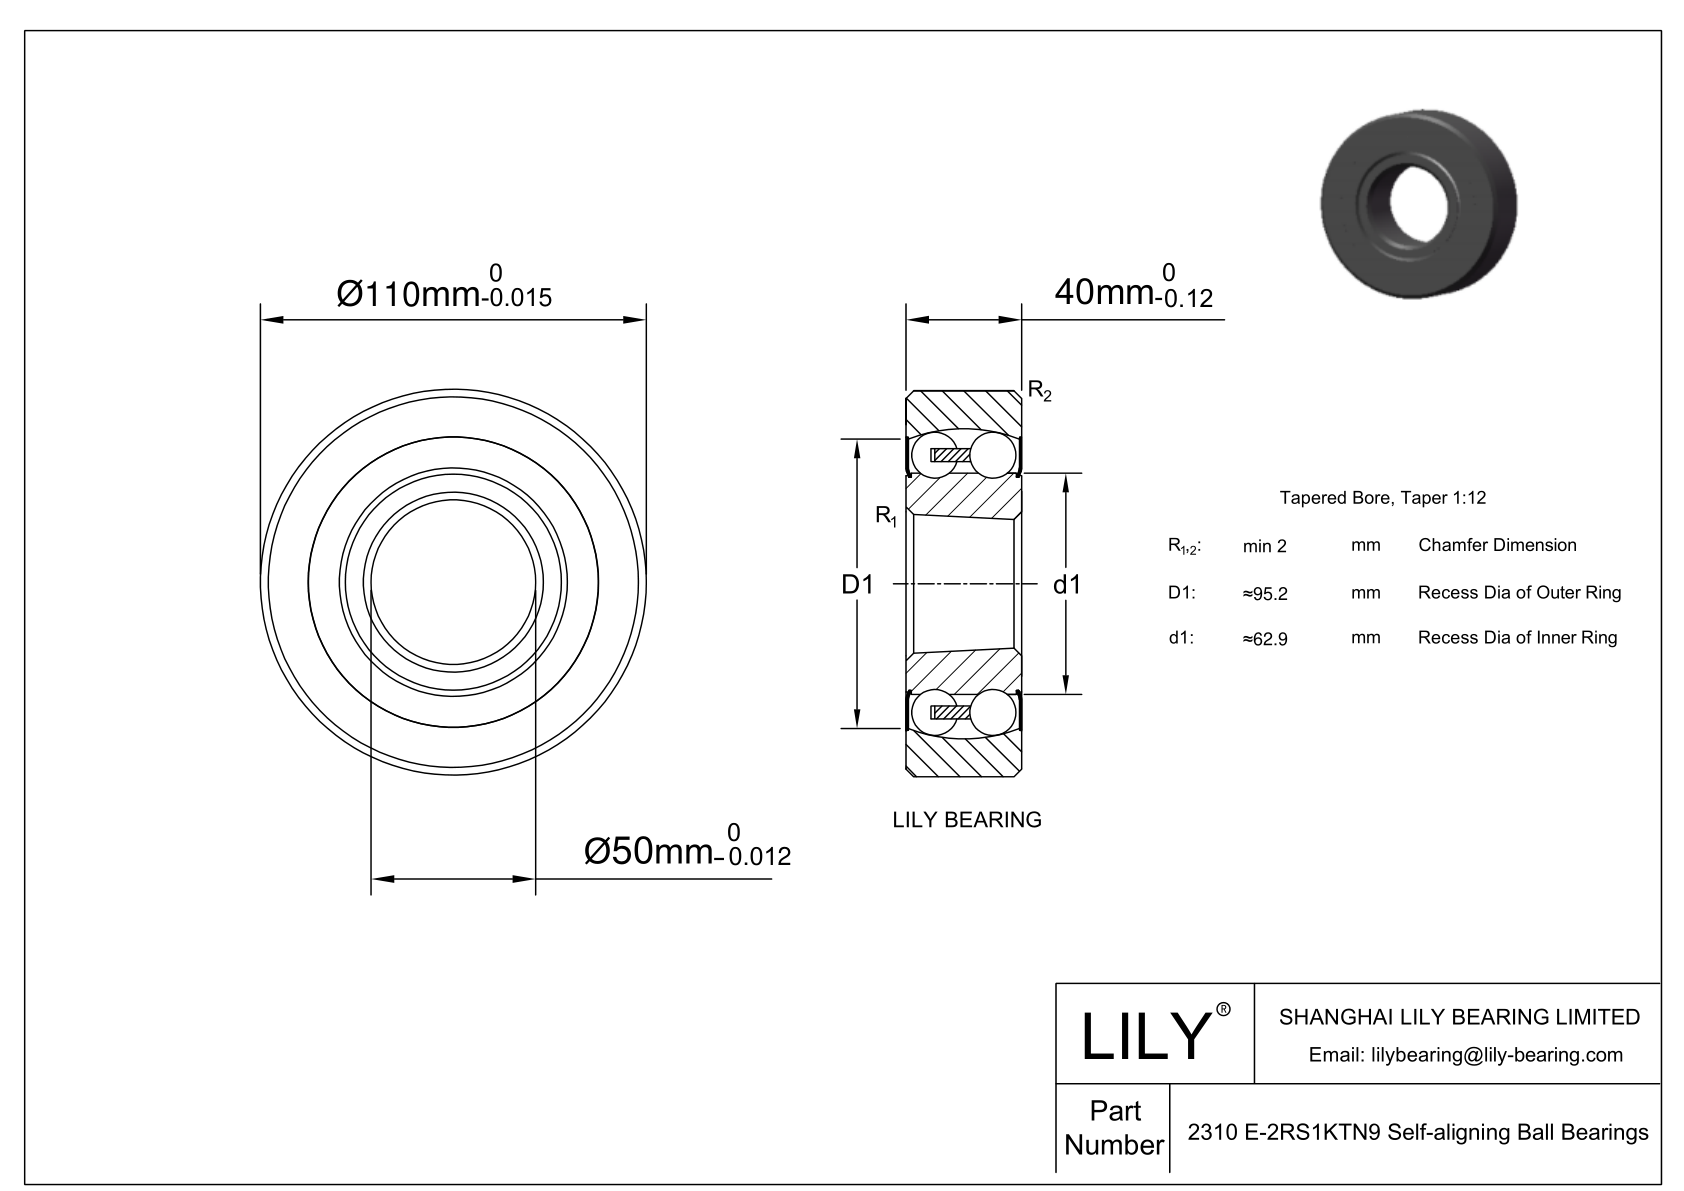 CE2310 E-SIPP Silicon Nitride Self Aligning Ball Bearings cad drawing